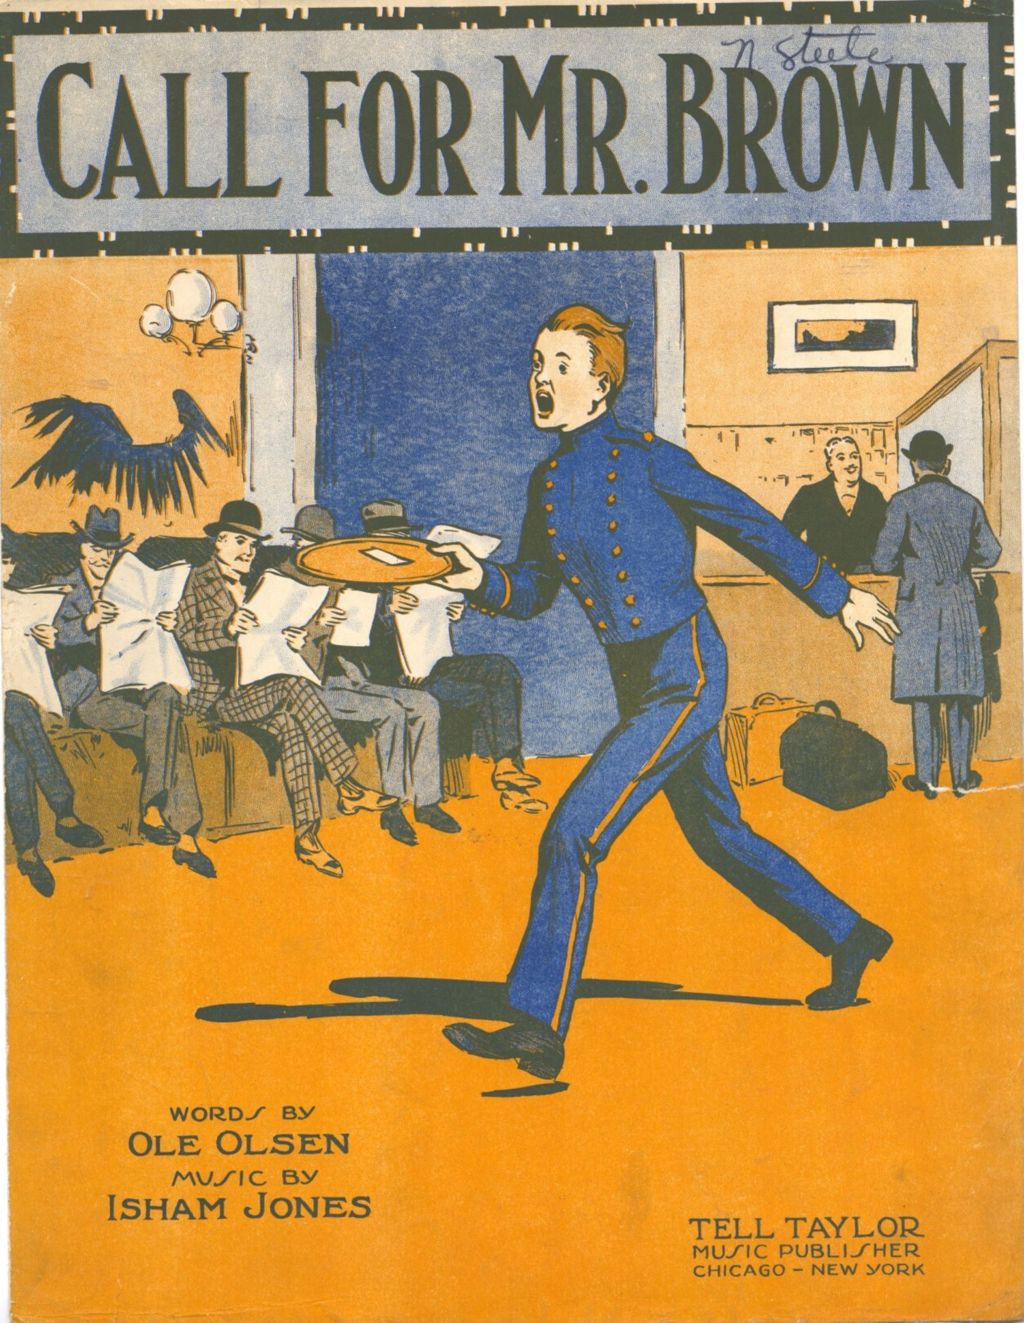 Miniature of Call For Mr. Brown